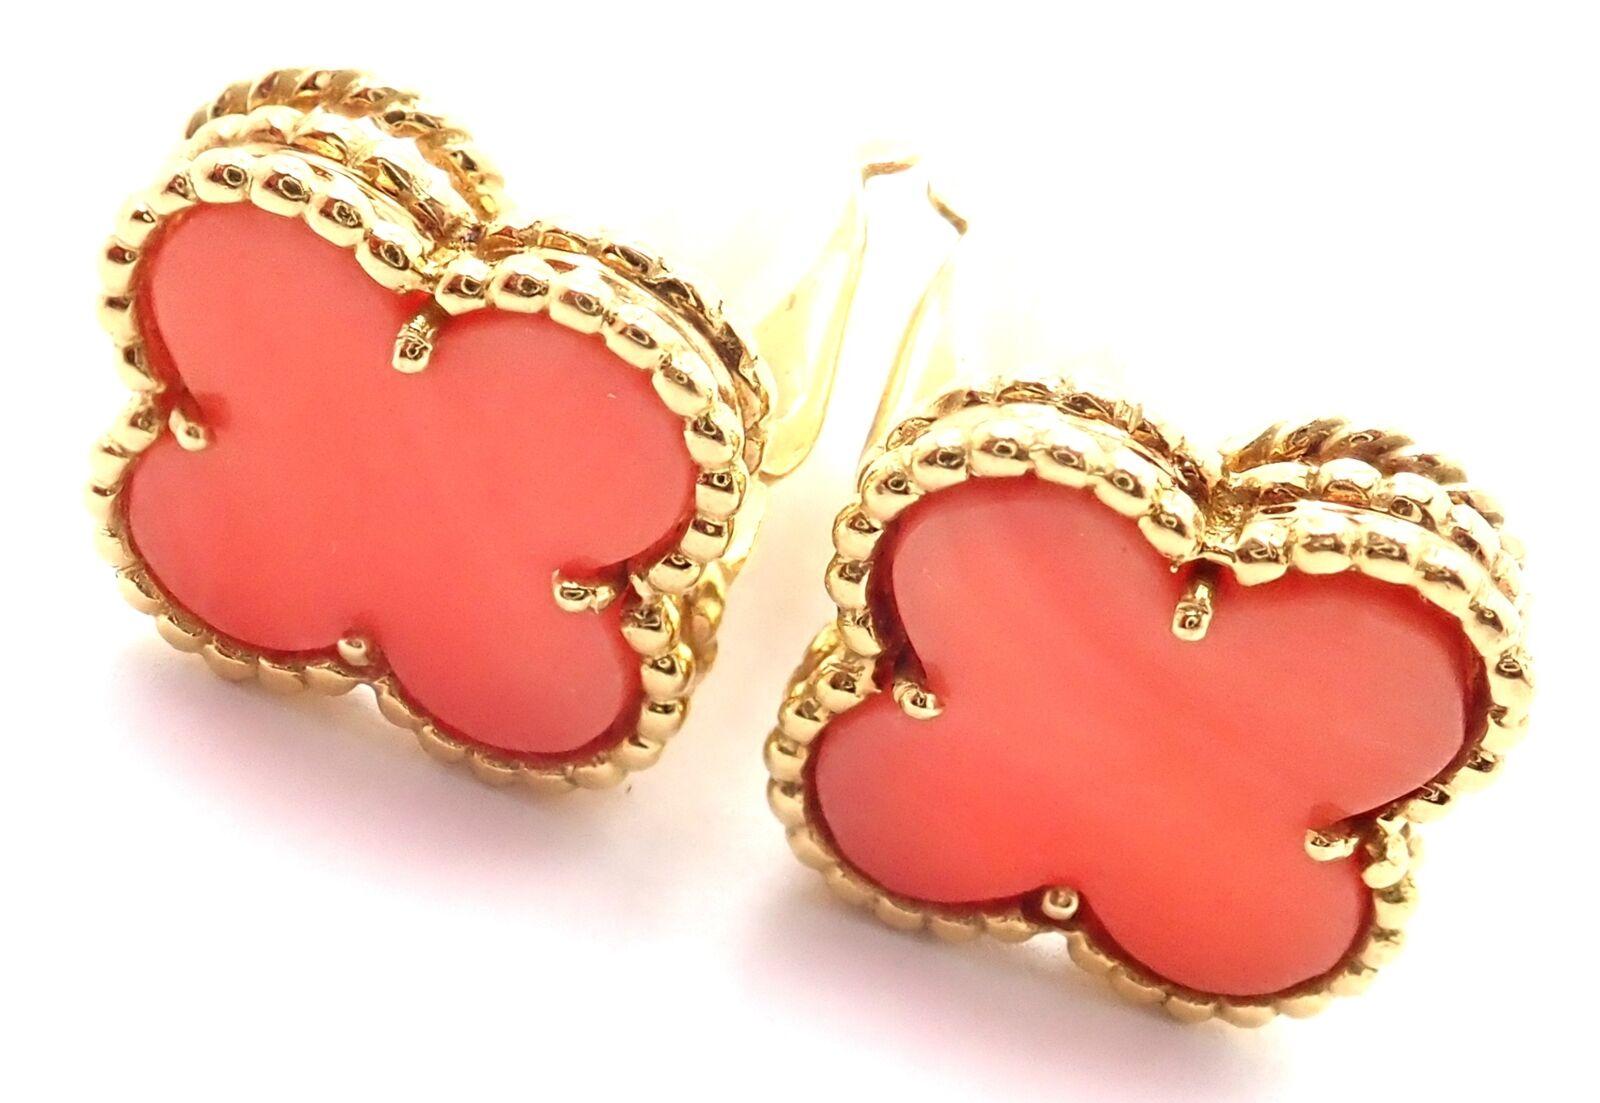 18k Yellow Gold Vintage Alhambra Coral Earrings by Van Cleef & Arpels.  
With 2 alhambra shape coral stones: 15mm each. 
These earrings are not pierced ears, but they can be converted to pierced ears by adding posts.
Details:  
Measurements: 15mm x